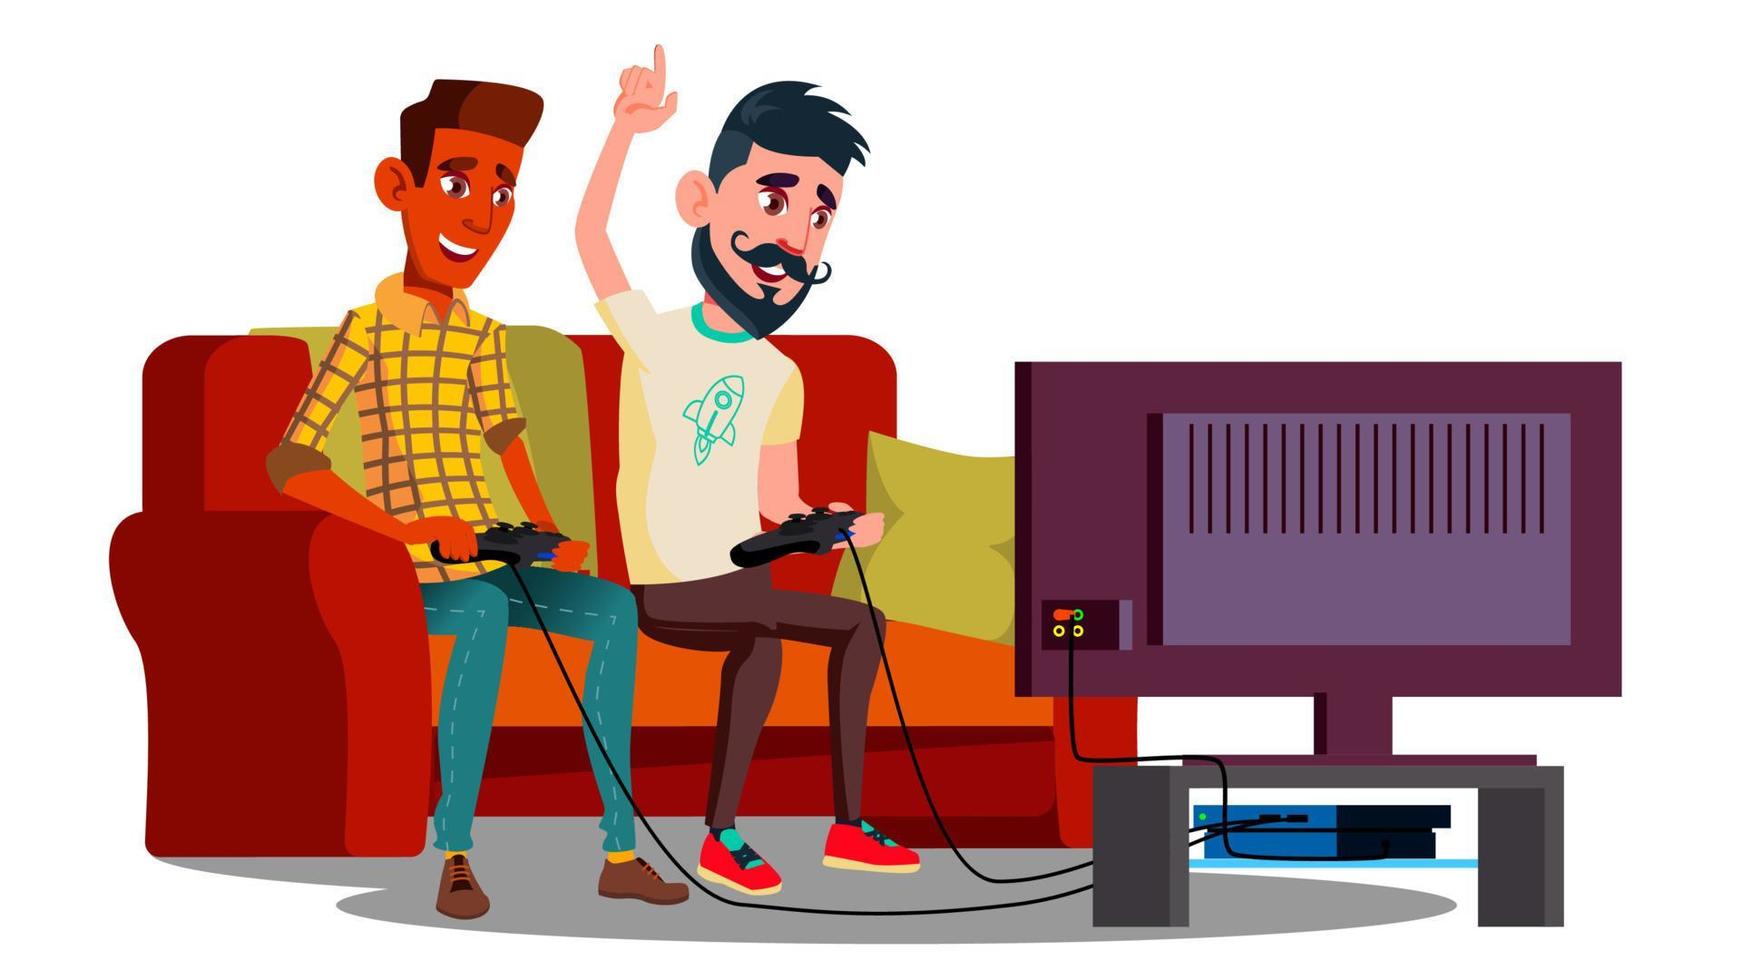 Group Of Teenage Friends Playing Video Games On The Couch Vector. Isolated Illustration vector